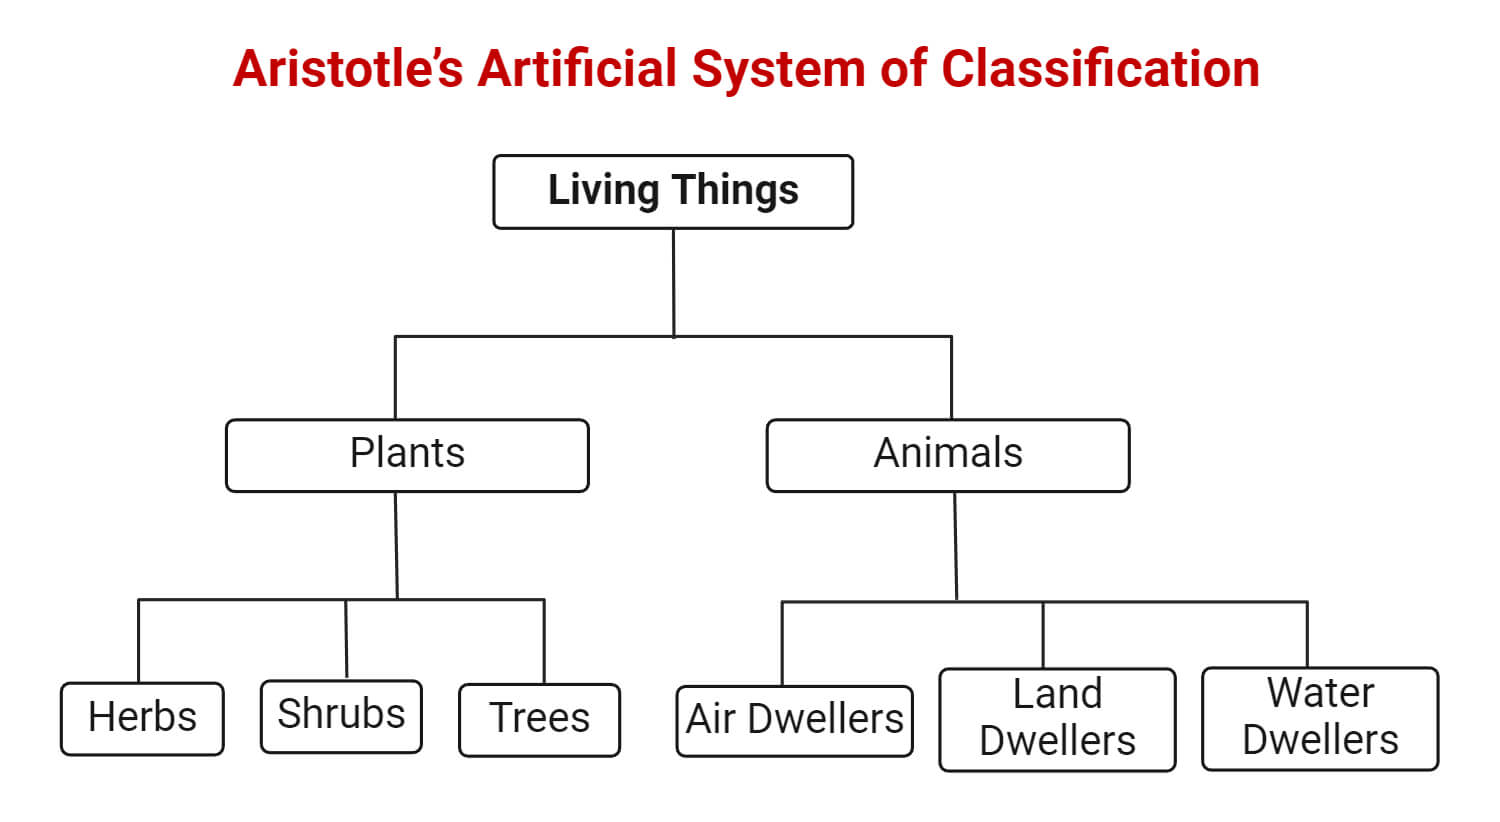 Aristotle’s Artificial System of Classification